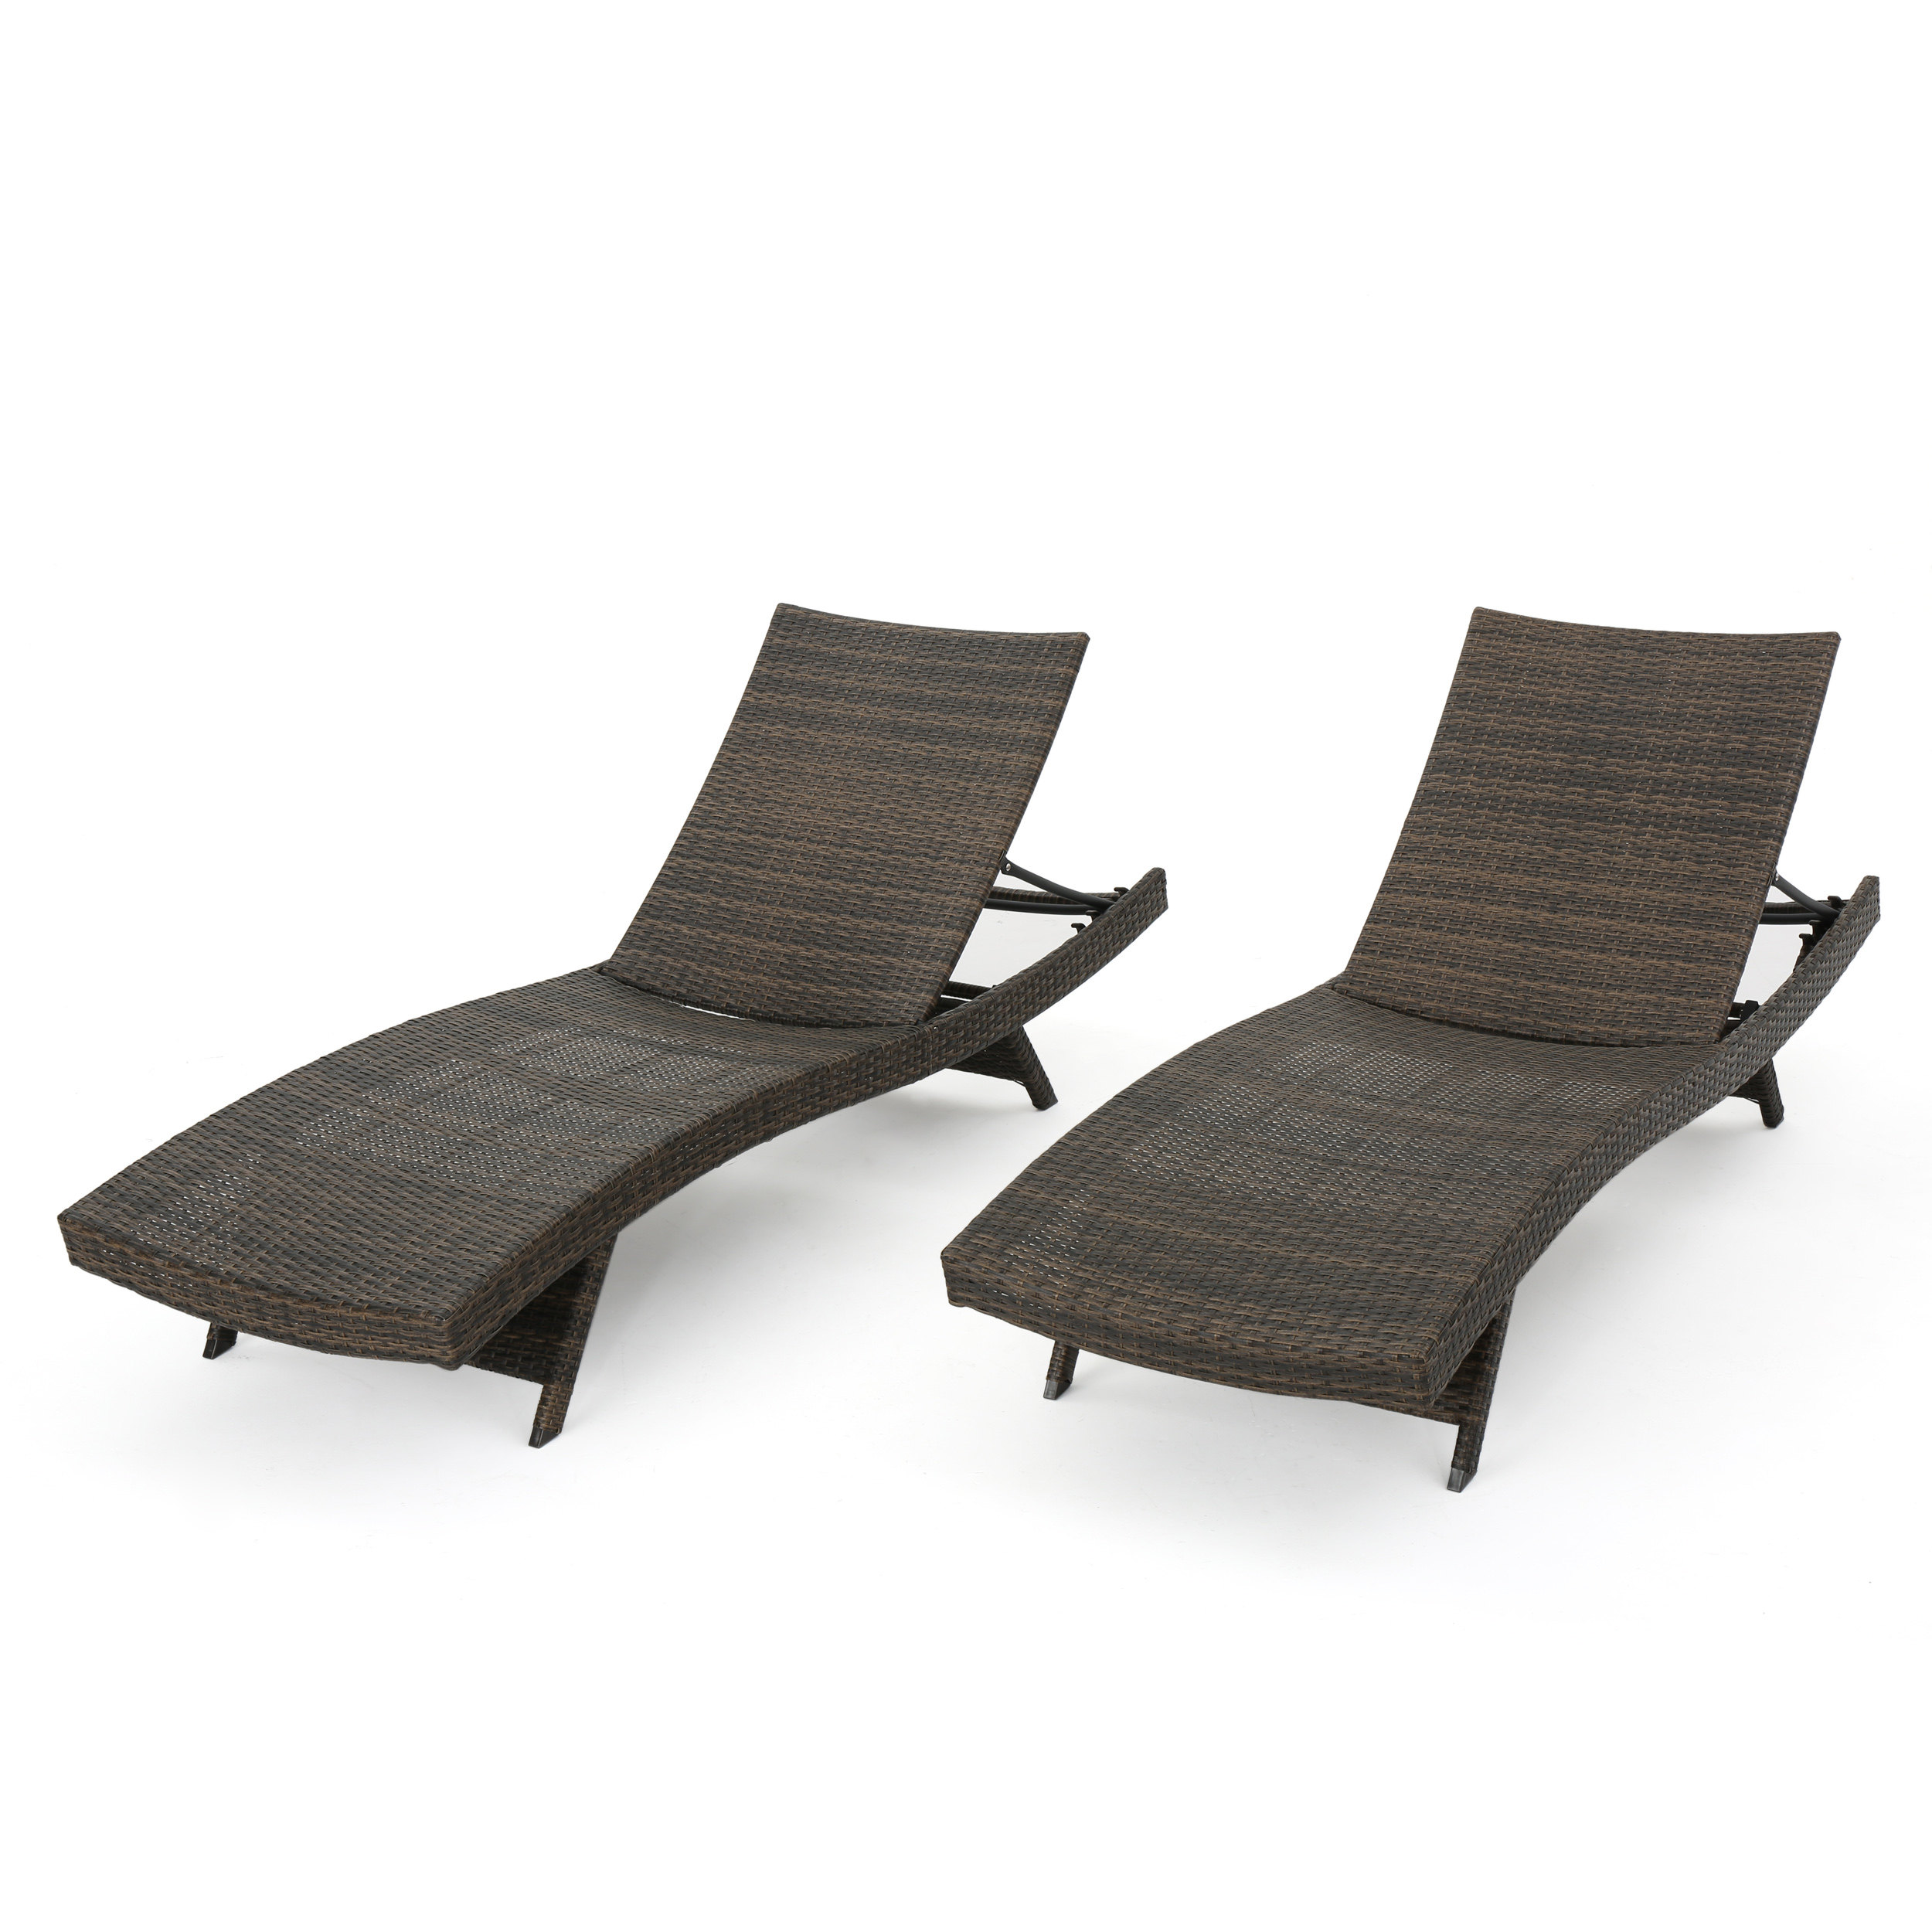 Thelma Outdoor Aluminum Wicker Chaise Lounge, Set of 2, Mixed Mocha - image 1 of 11